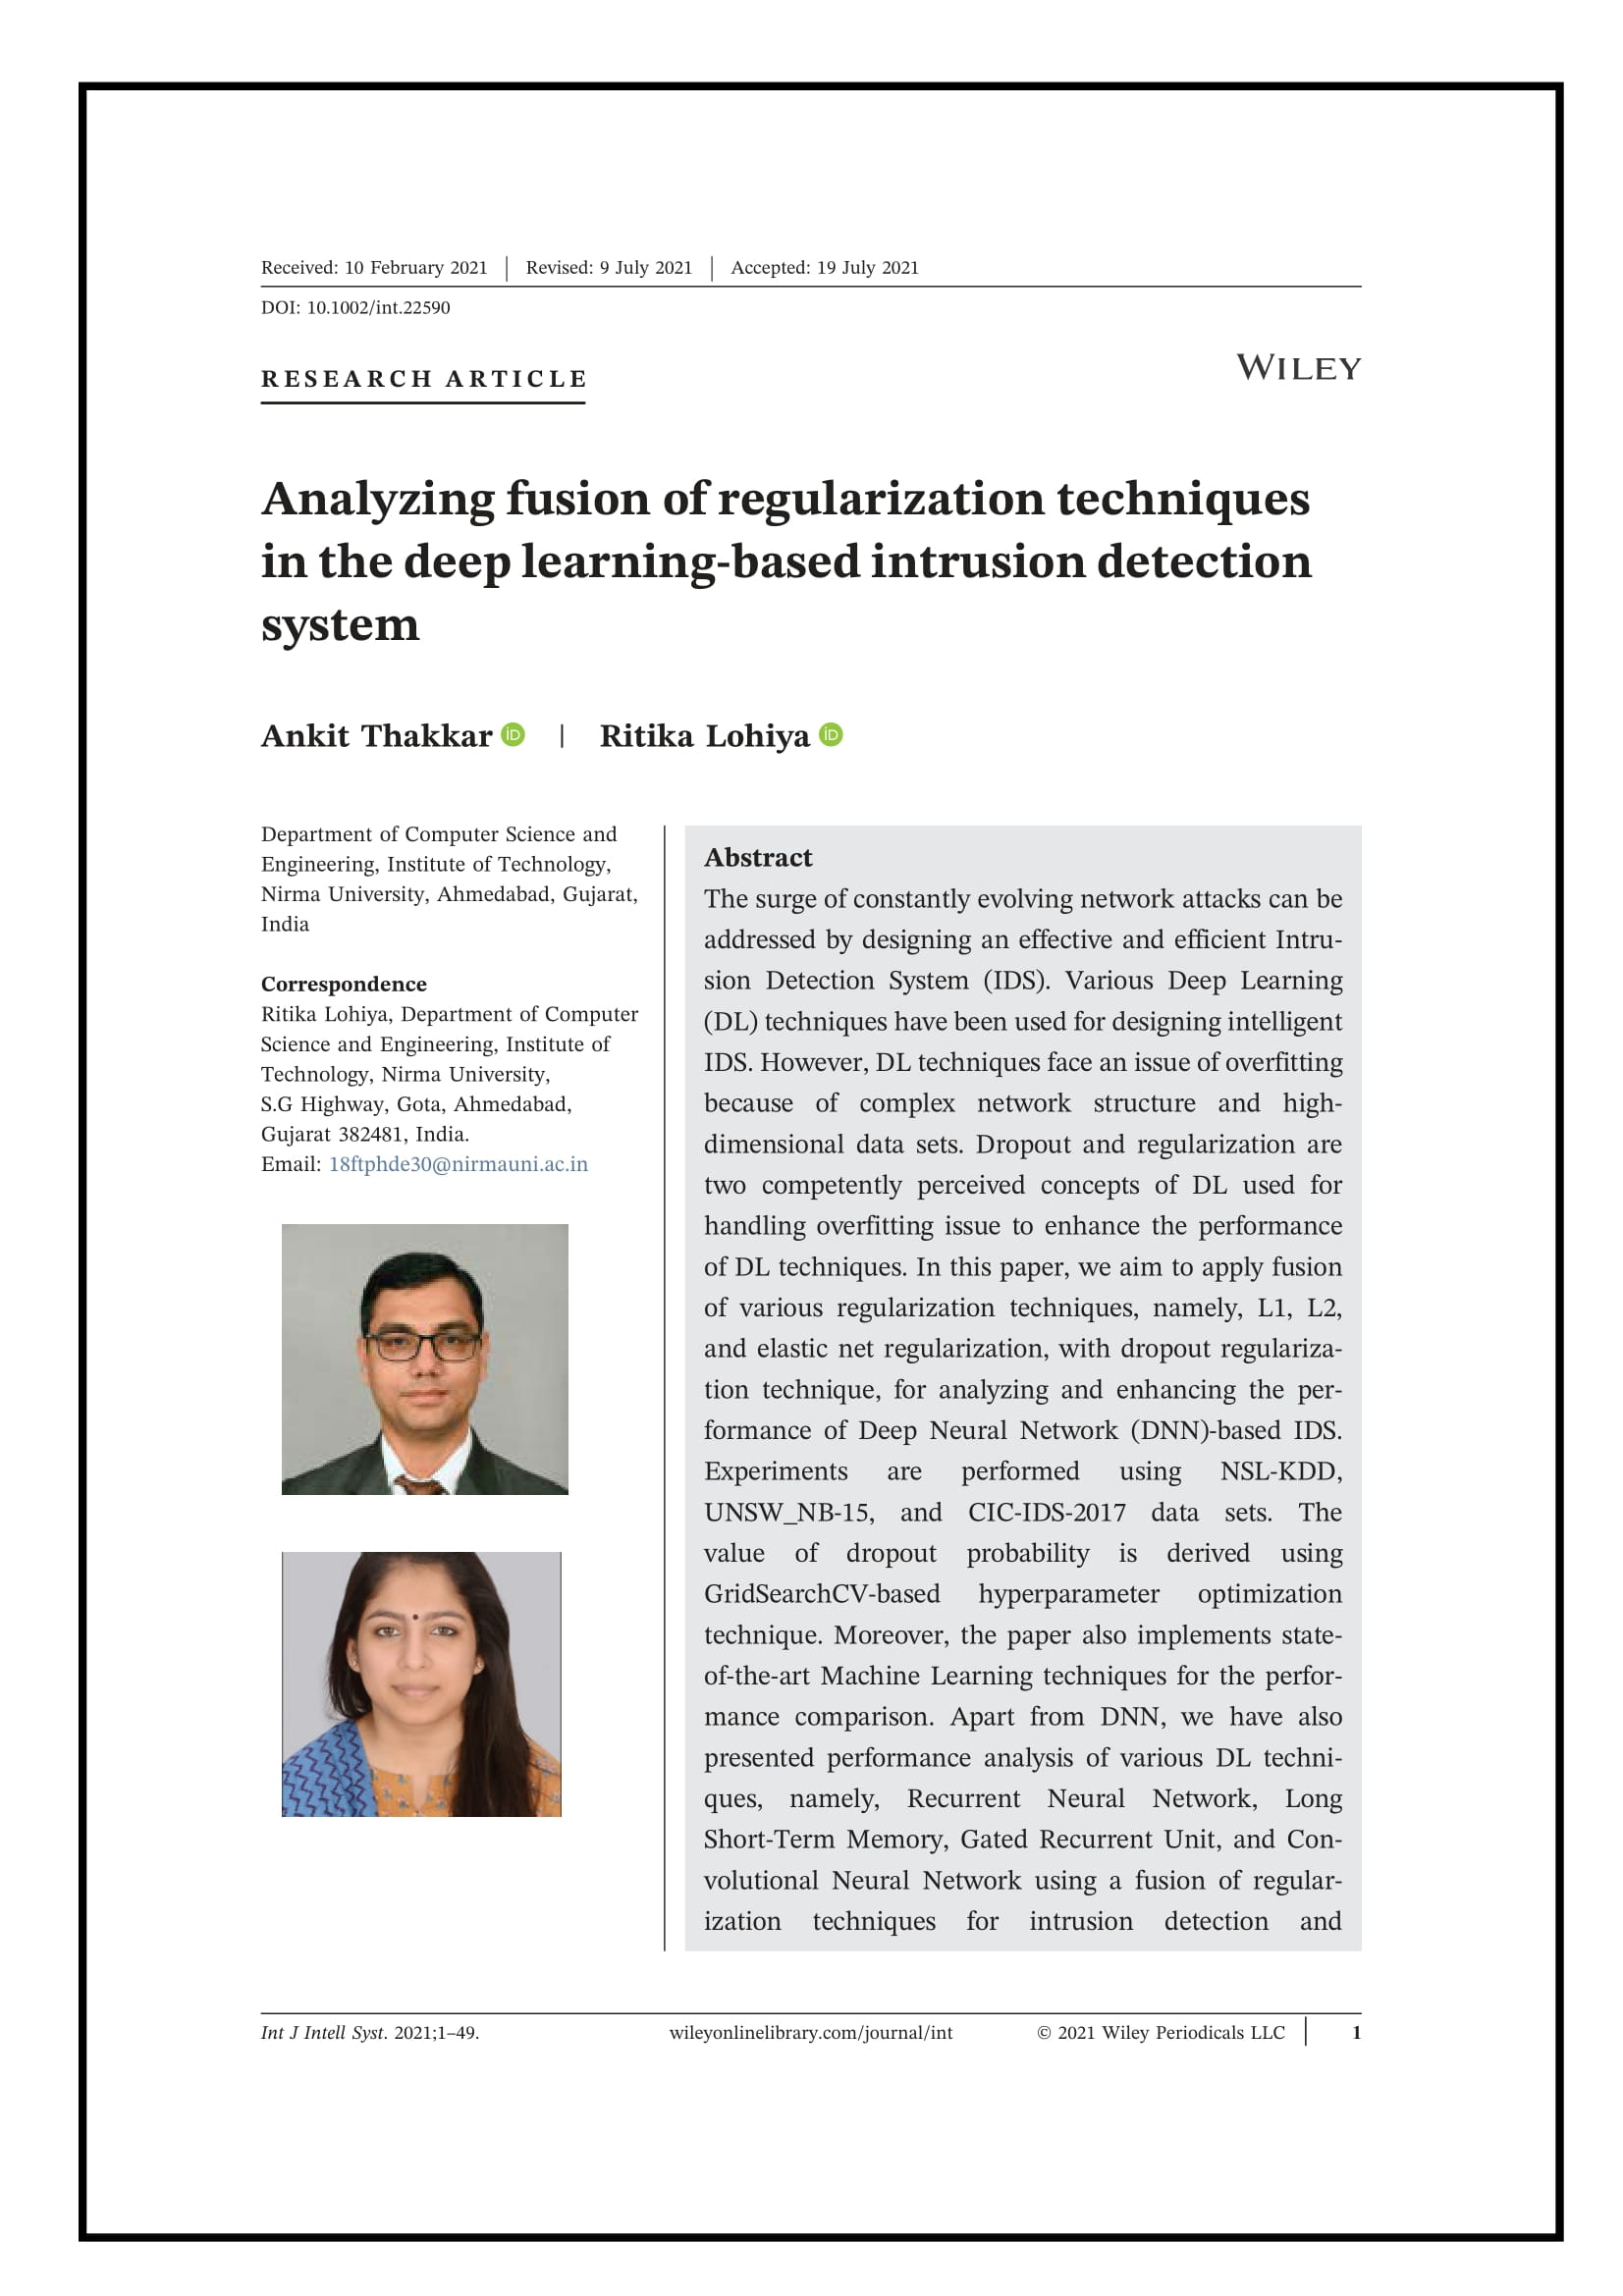 Analyzing fusion of regularization technique in the deep learning?based intrusion detection system